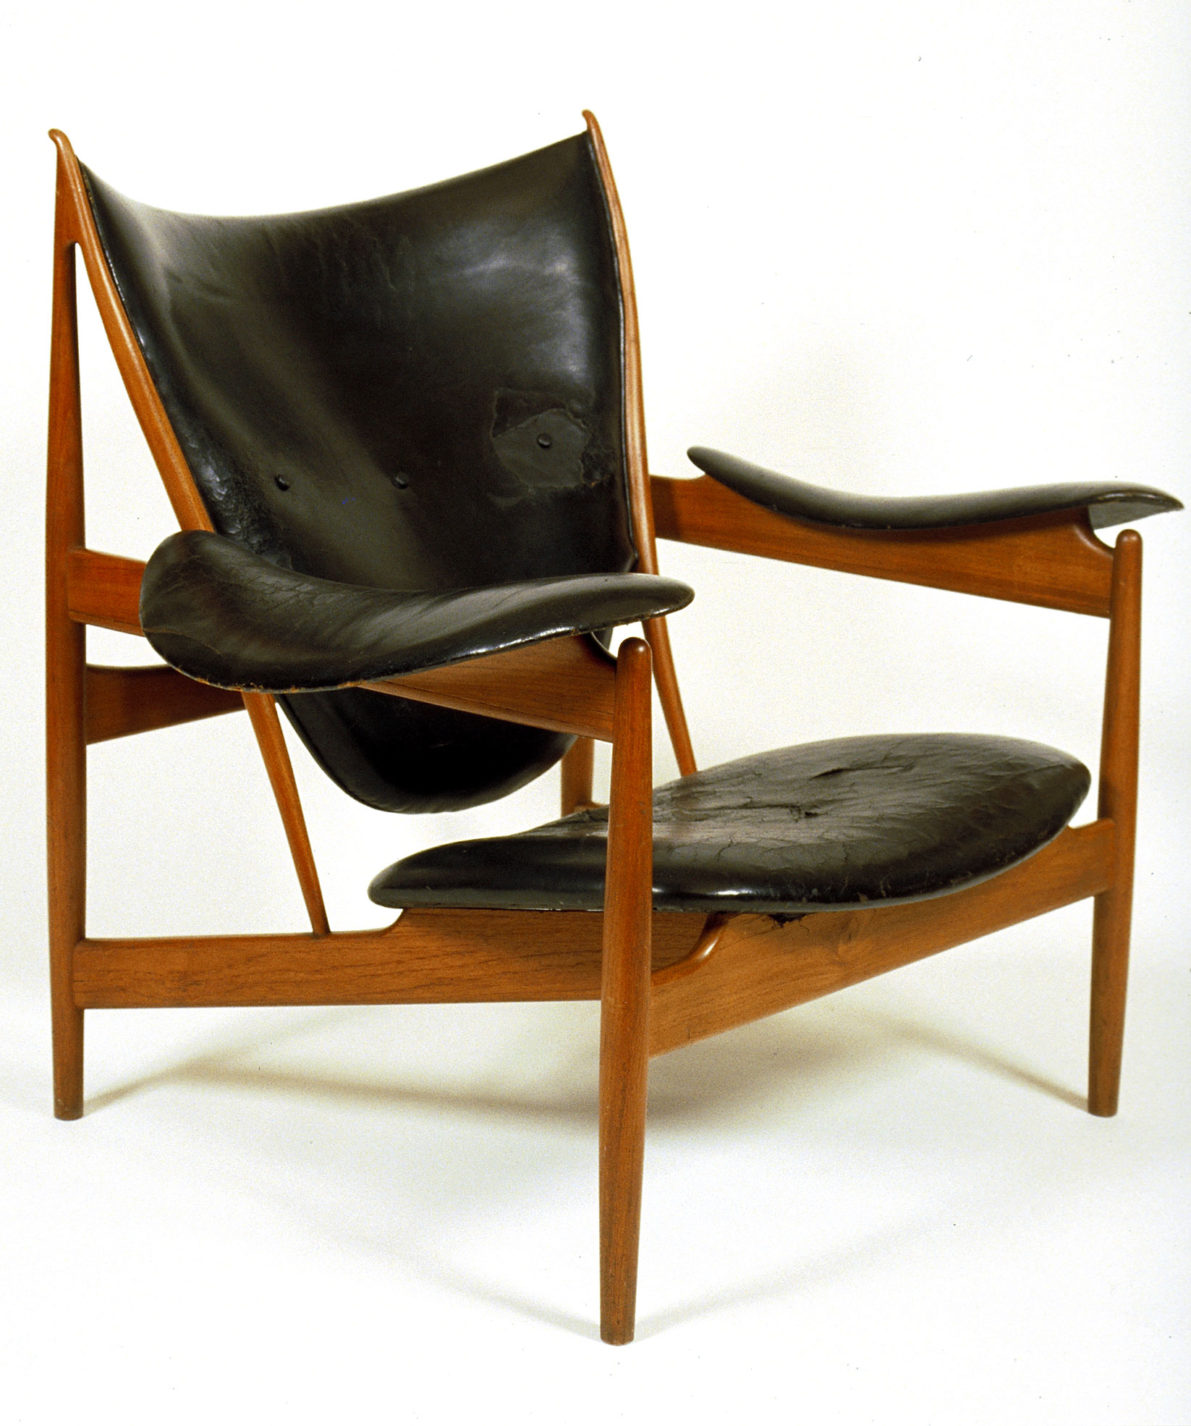 Armchair with an angular wooden frame and swooping leather cushions for the seat, back and arms.